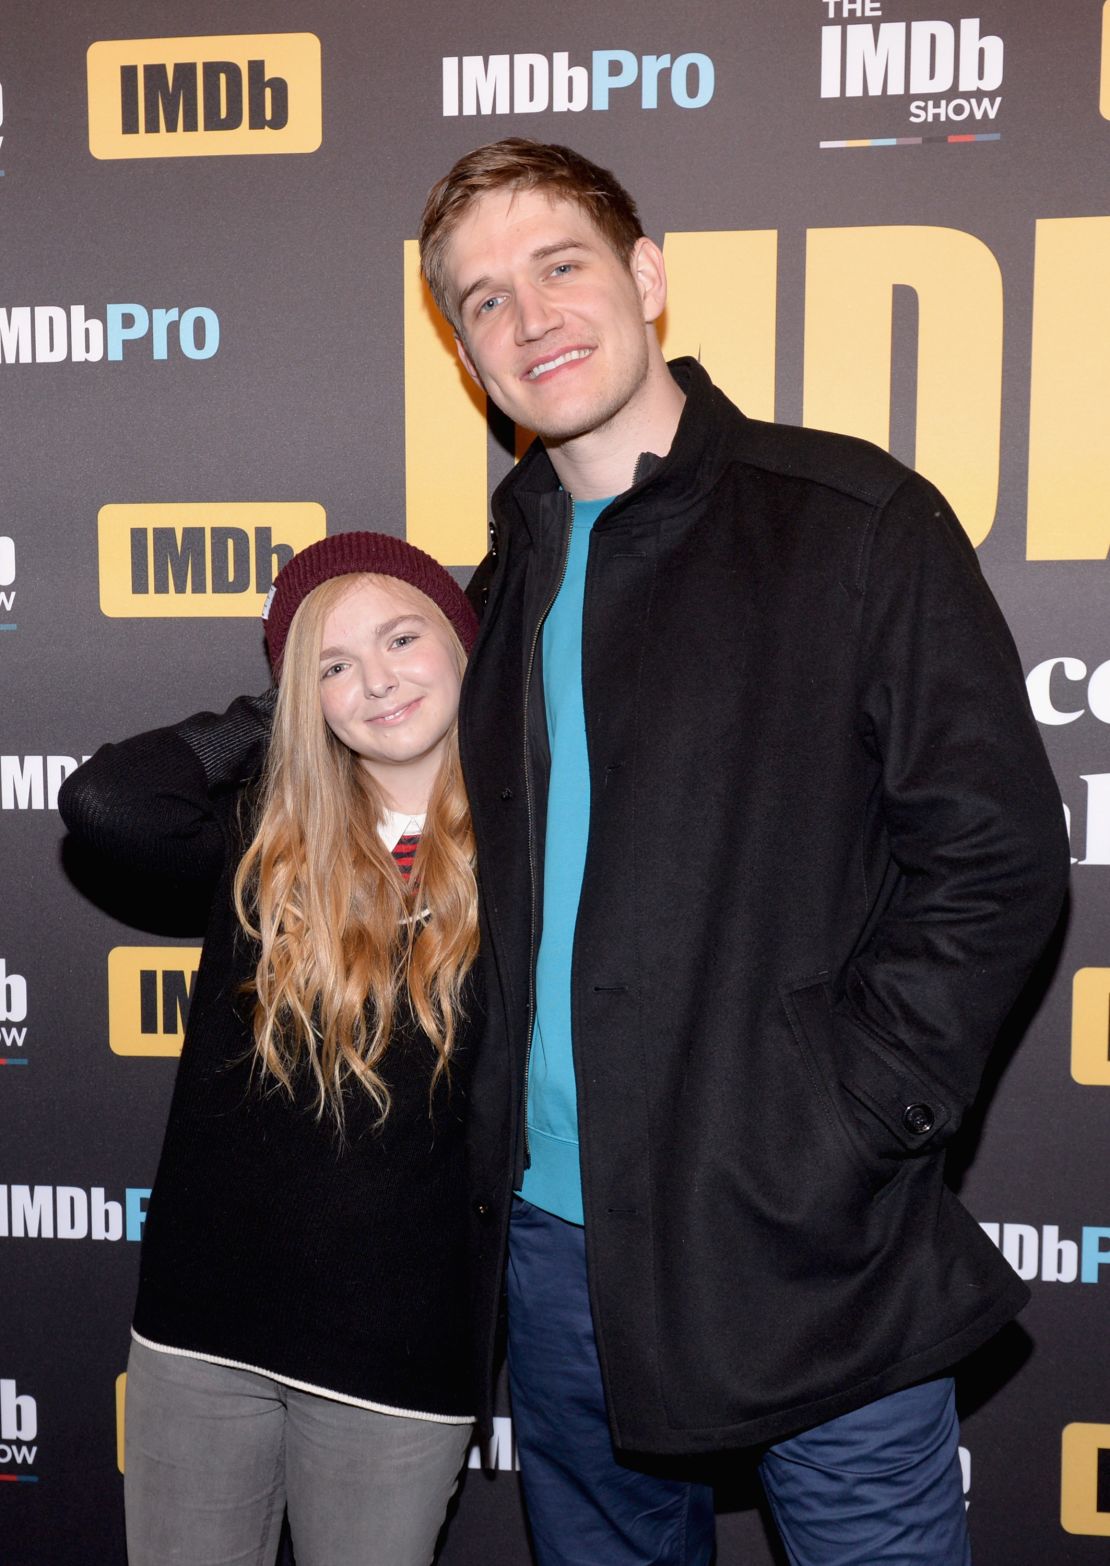 Actor Elsie Fisher and director Bo Burnham of 'Eighth Grade' attend The IMDb Studio and The IMDb Show on Location at The Sundance Film Festival on January 20, 2018 in Park City, Utah.